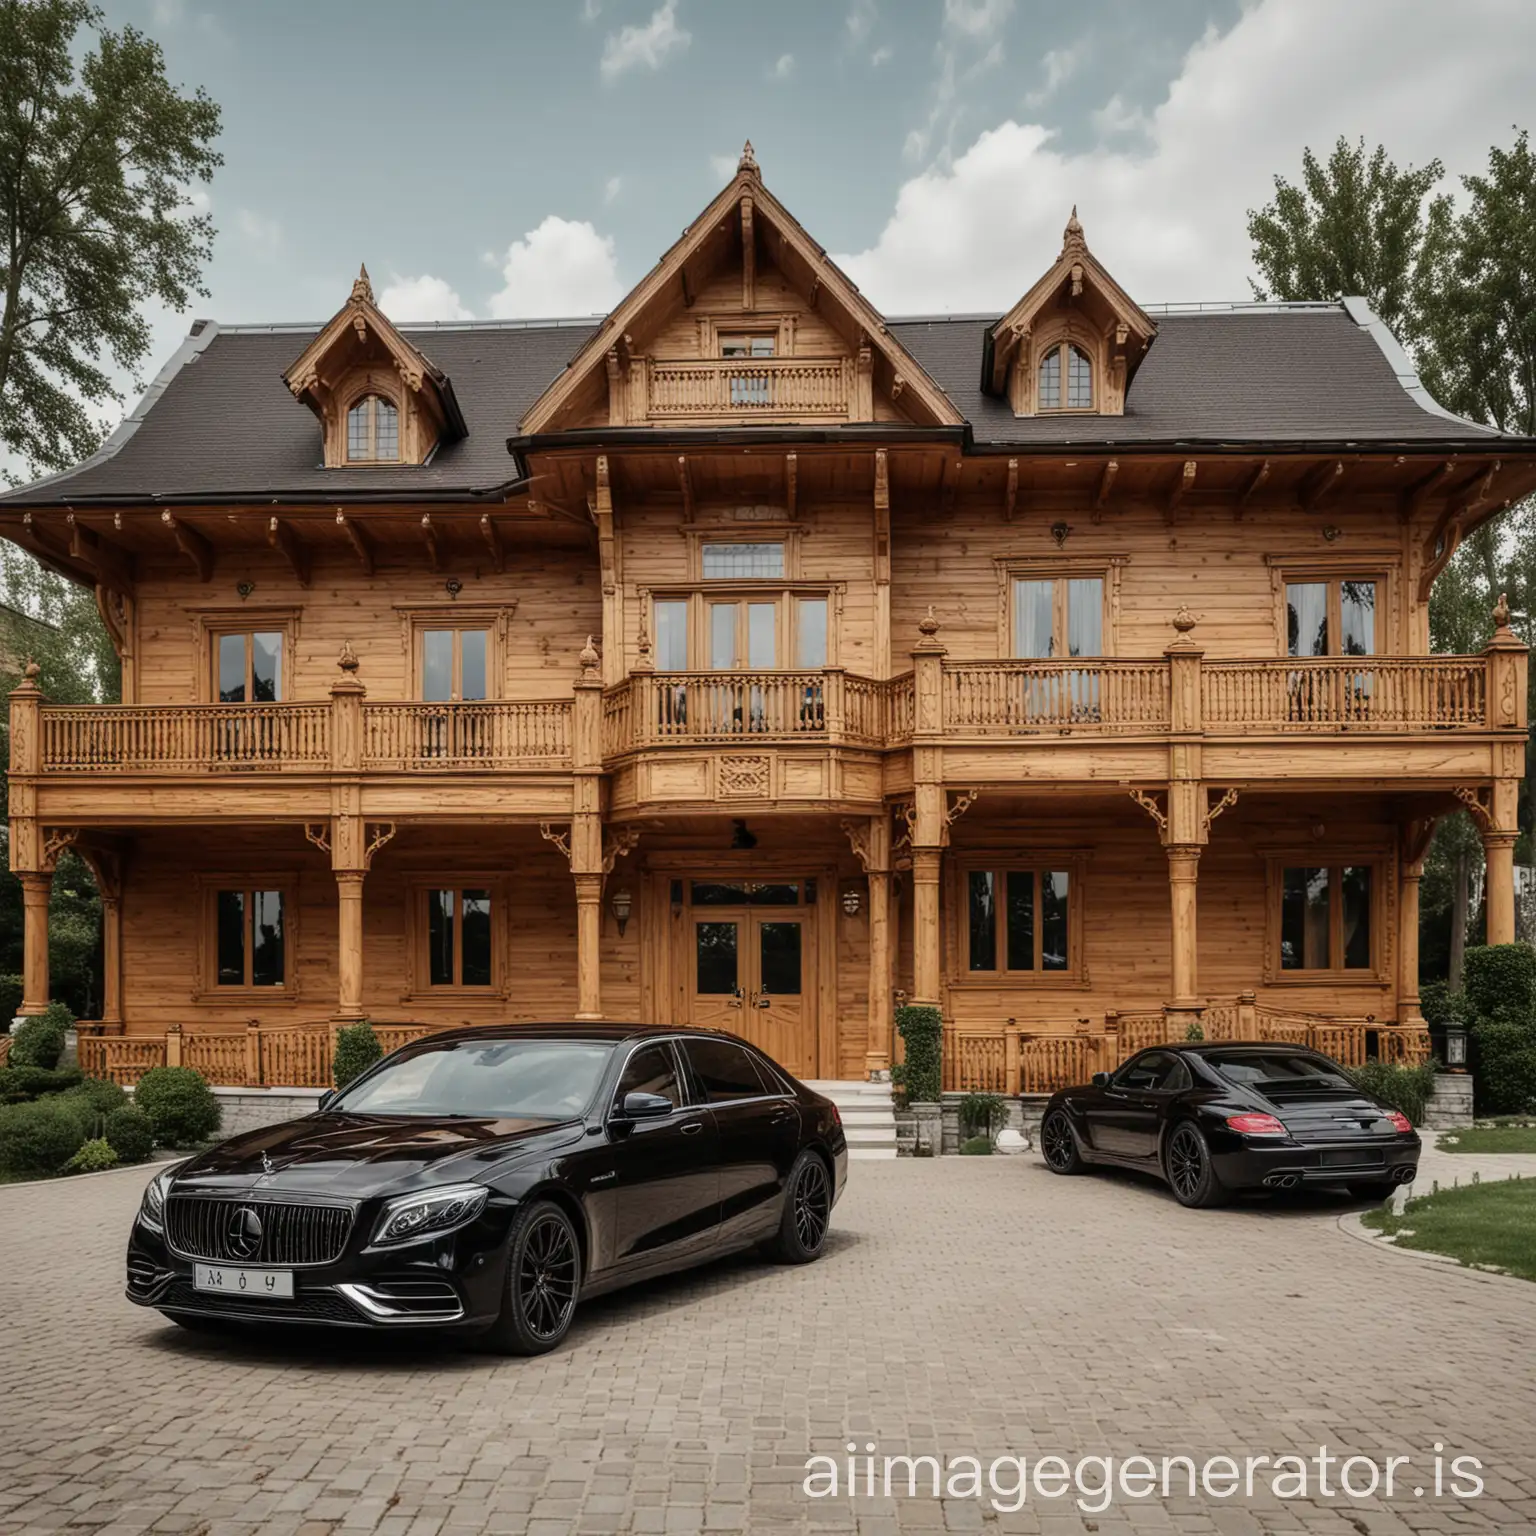 Luxury-Wooden-Mansion-with-Guarded-Entrance-and-Luxury-Cars